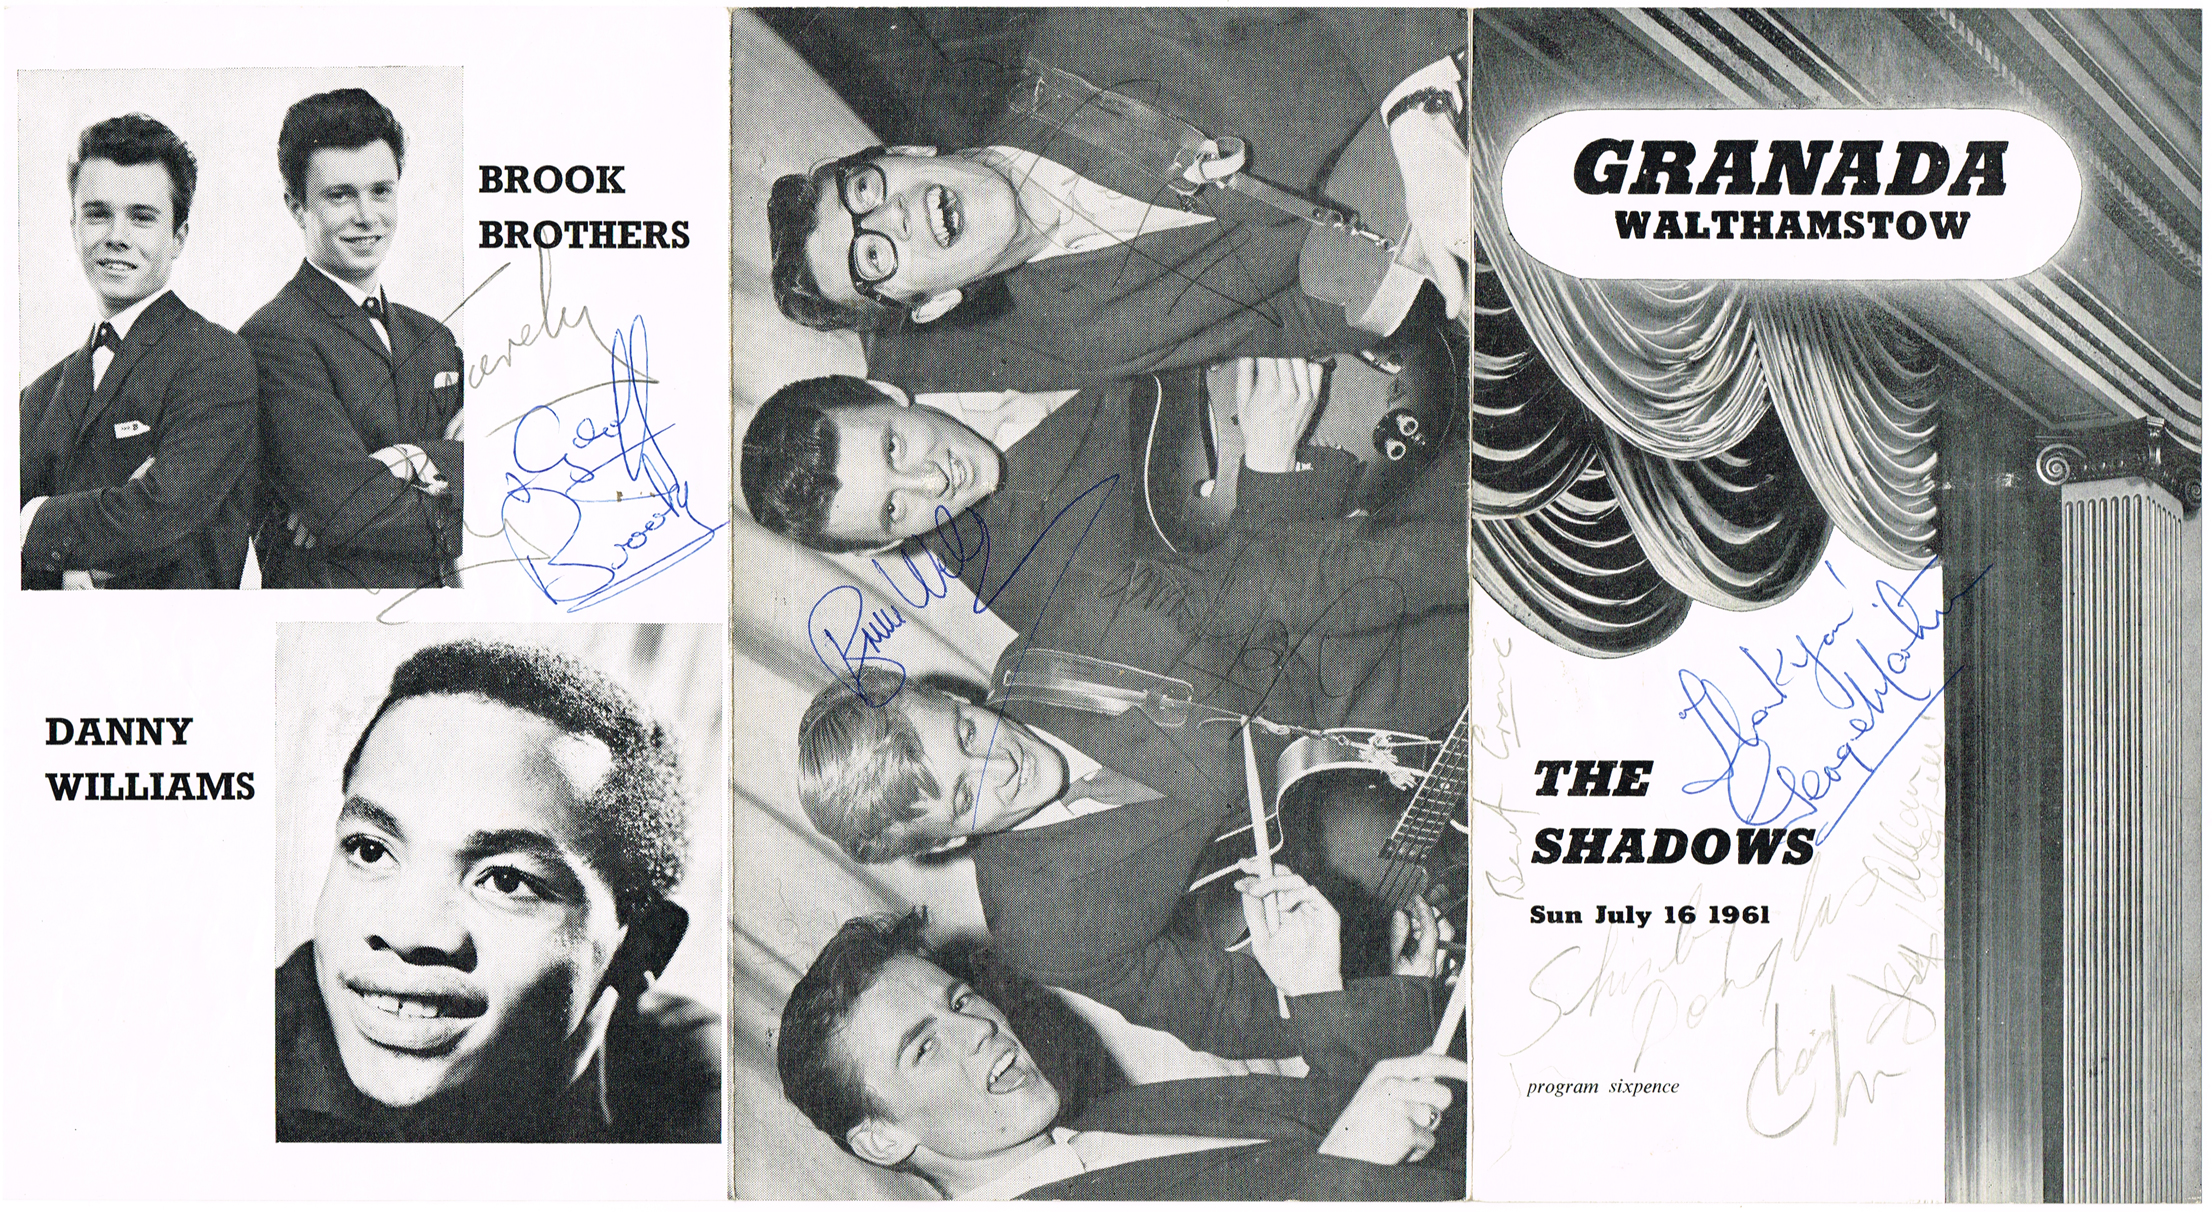 Various Artists: Granada Theatre Walthamstow show programmes, many with autographs including George Martin at Whyte's Auctions